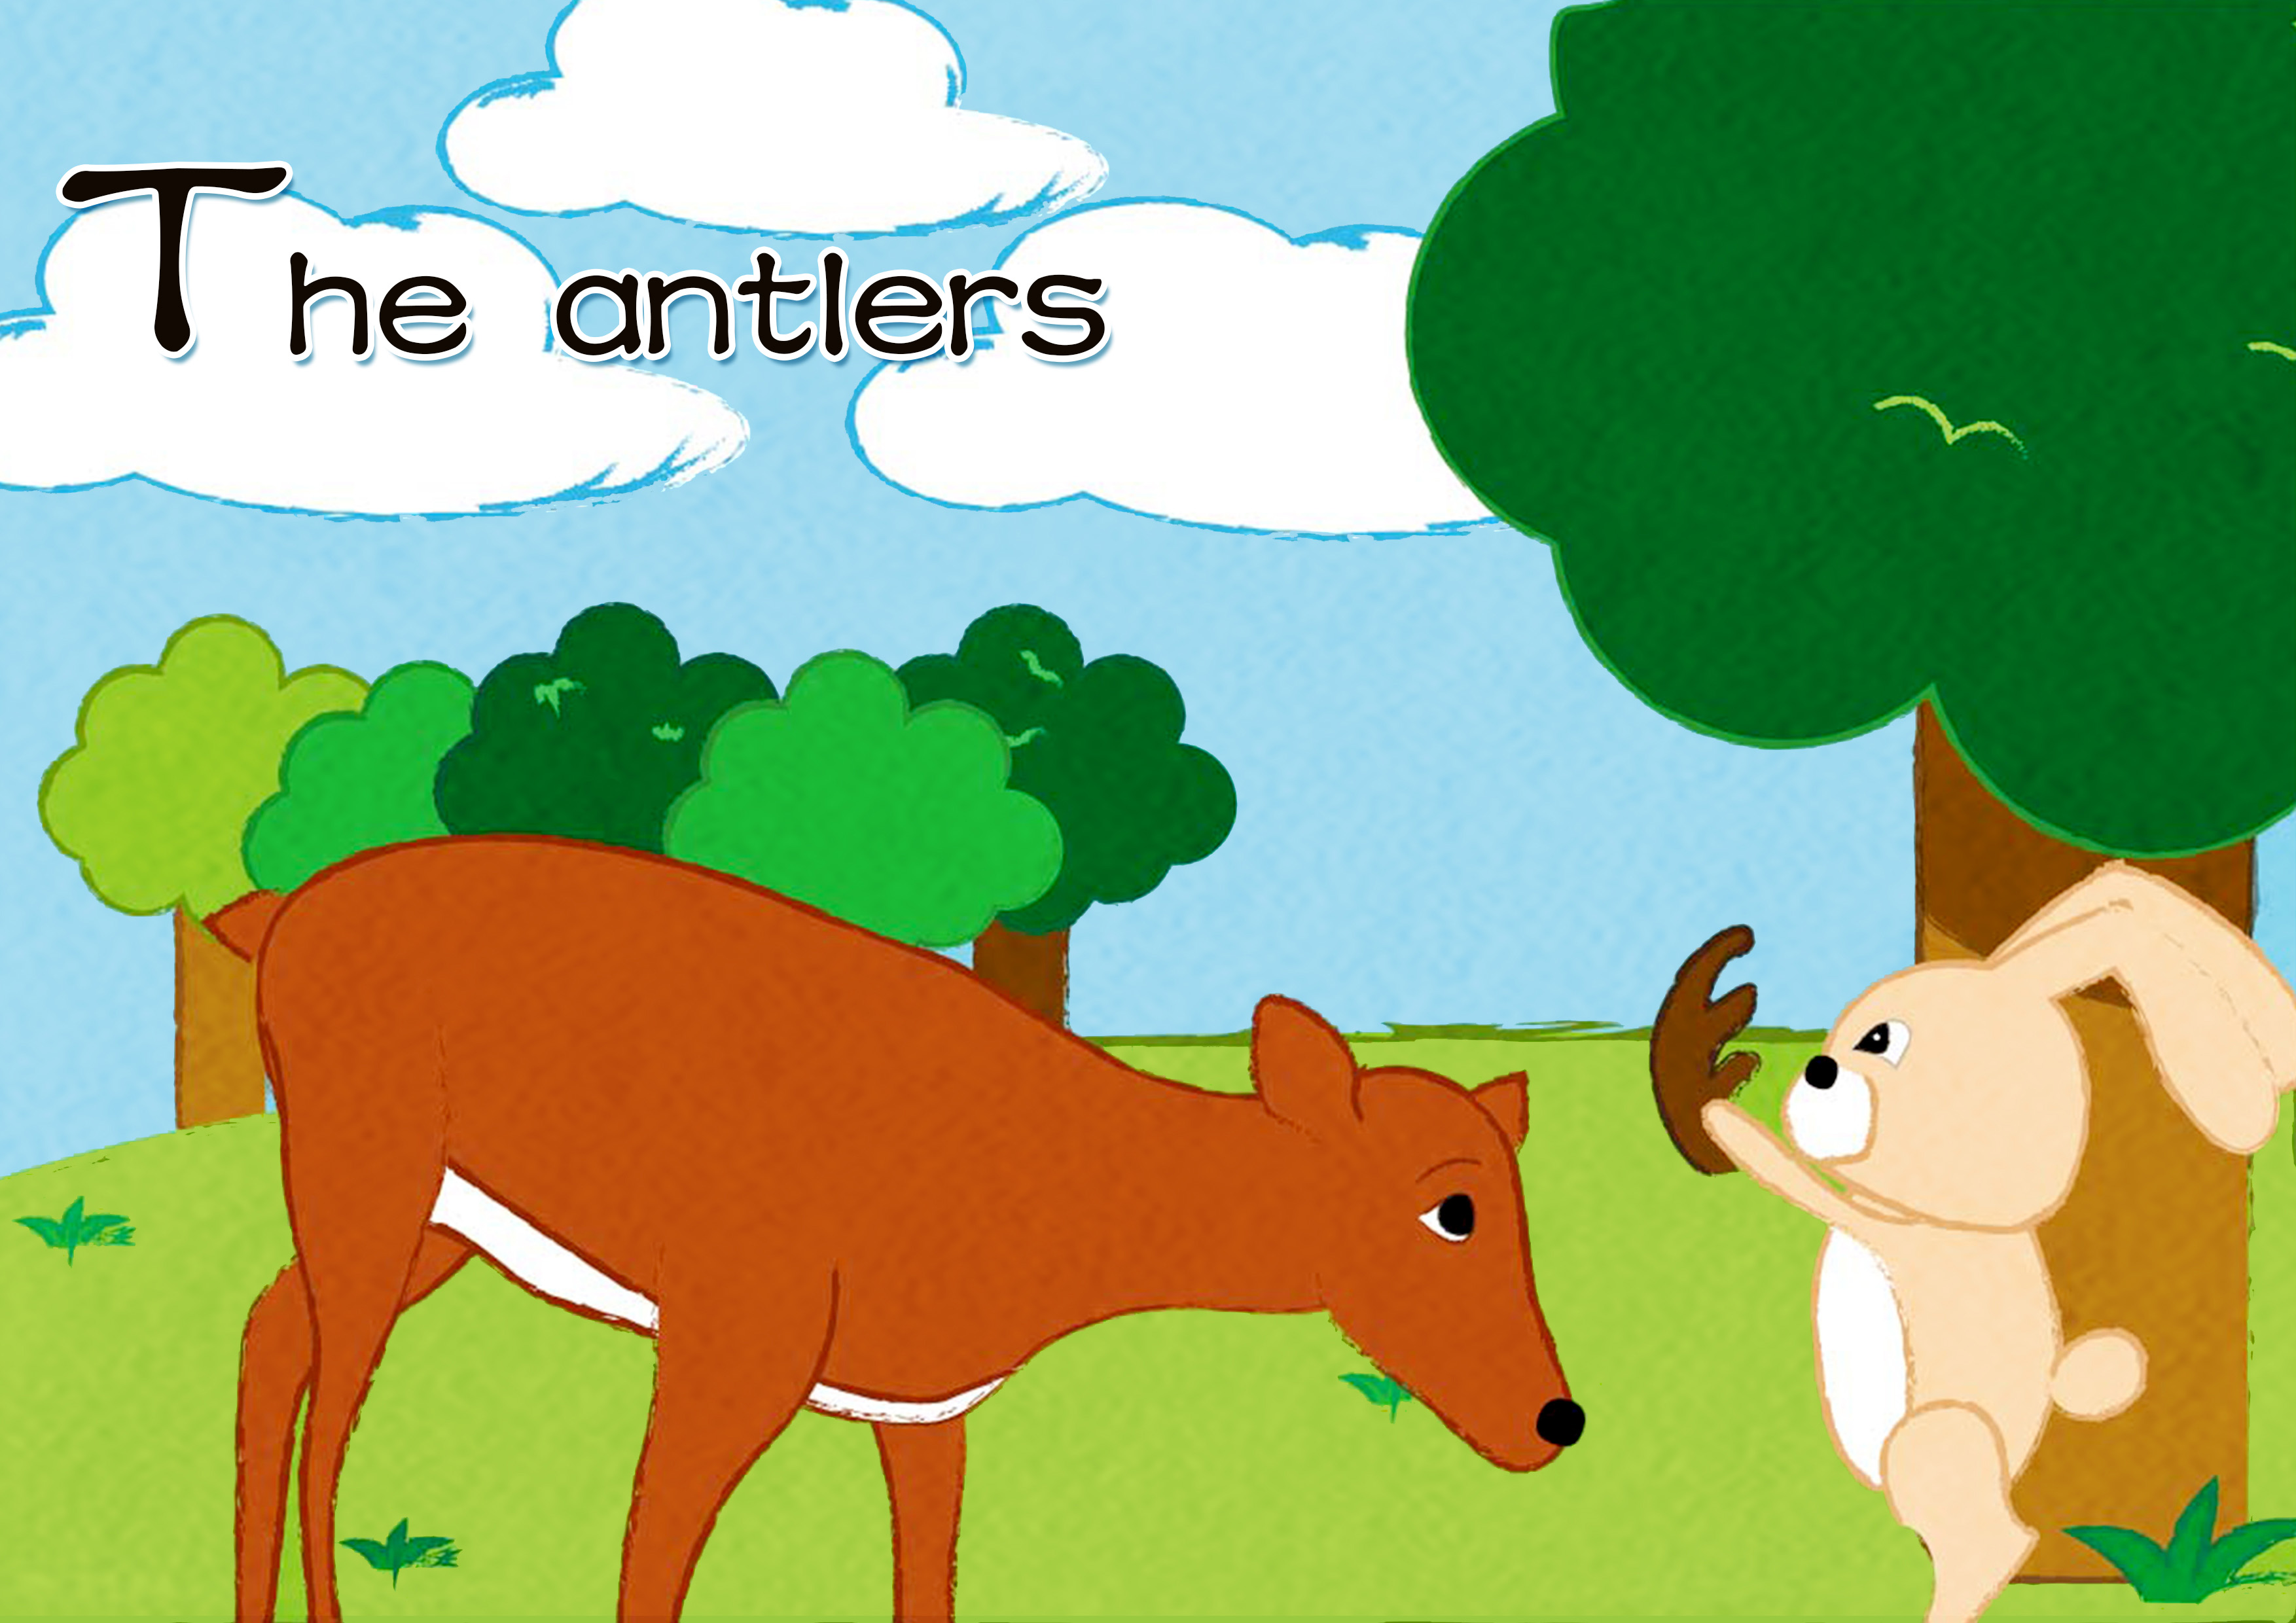 The antlers